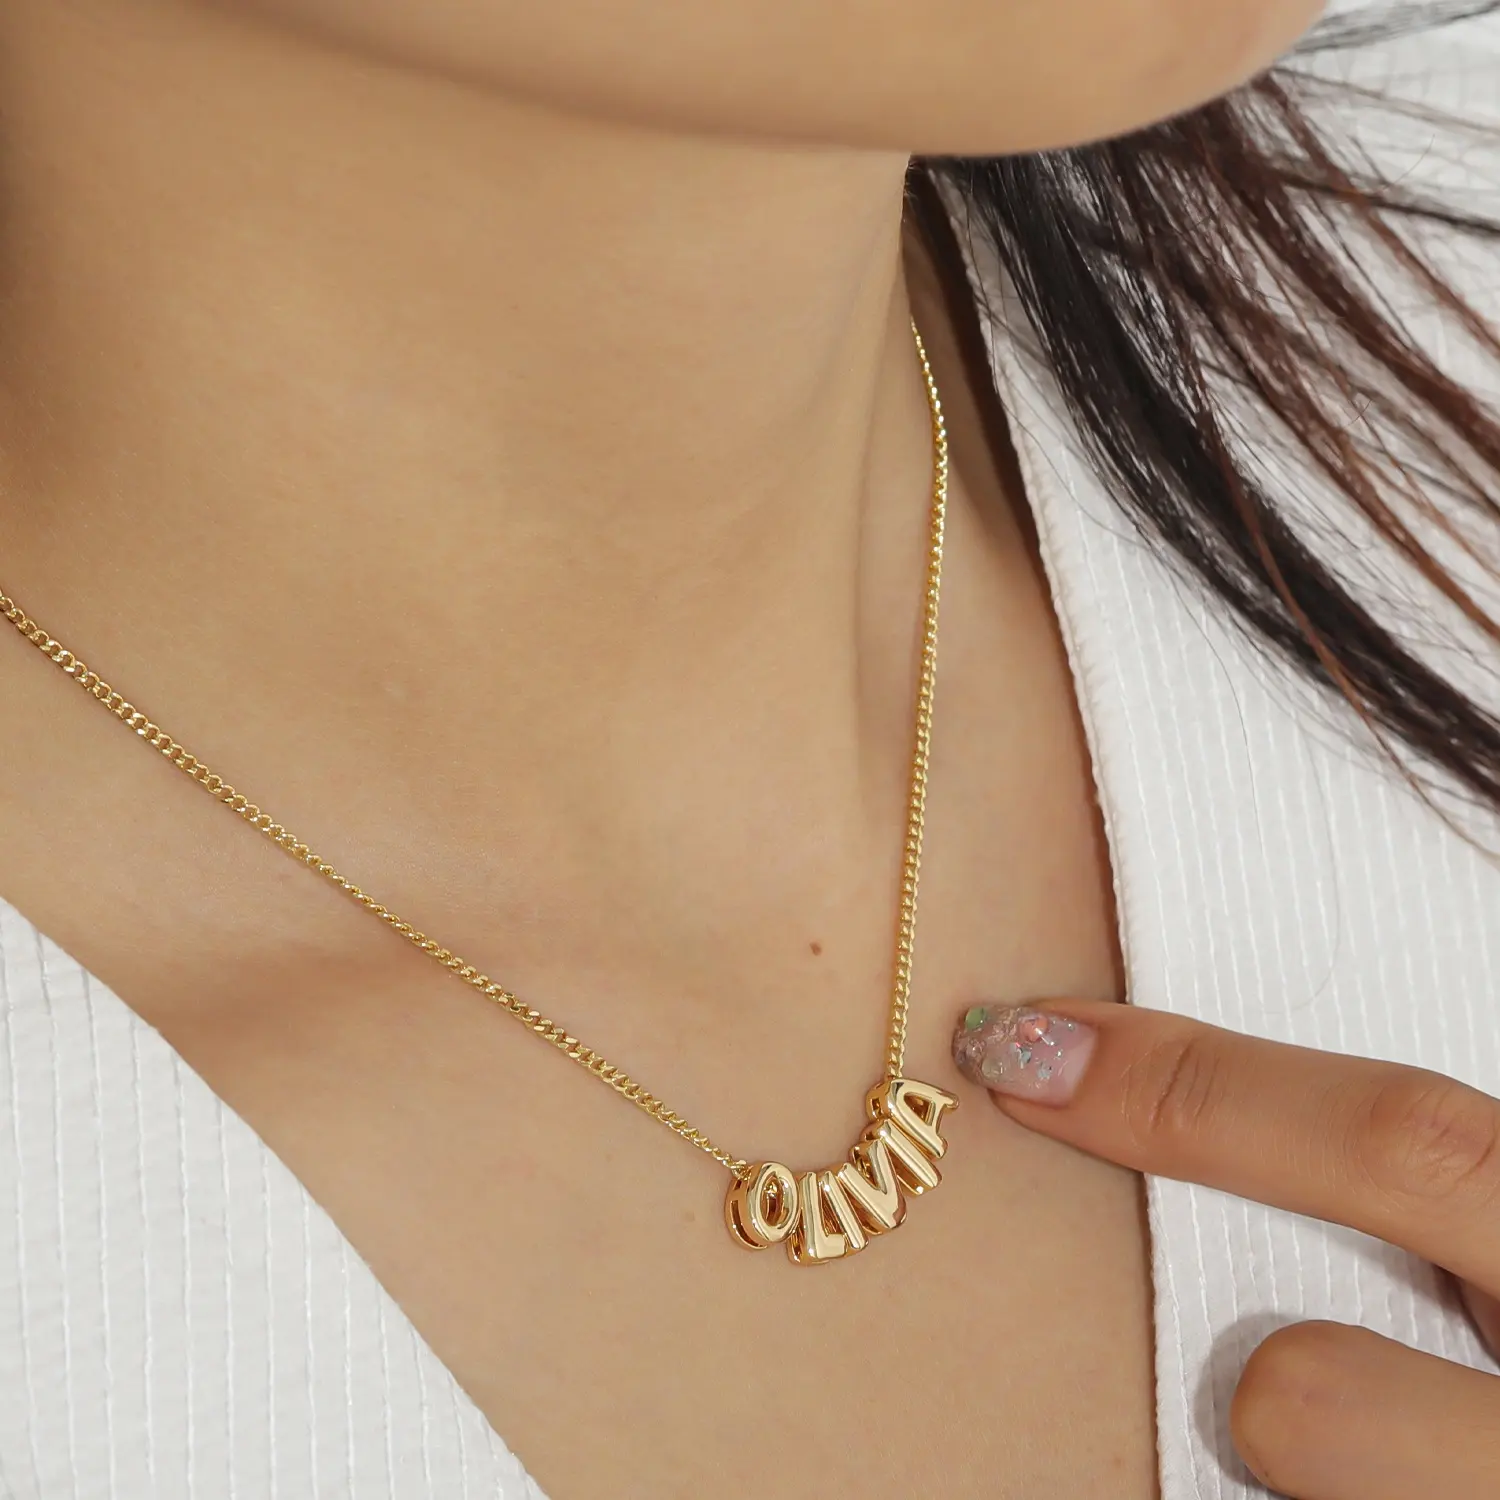 3D Bubble Letter Necklace Custom Name Jewelry Initial Balloon Letters Pendant jewelry for women 18K Gold Plate